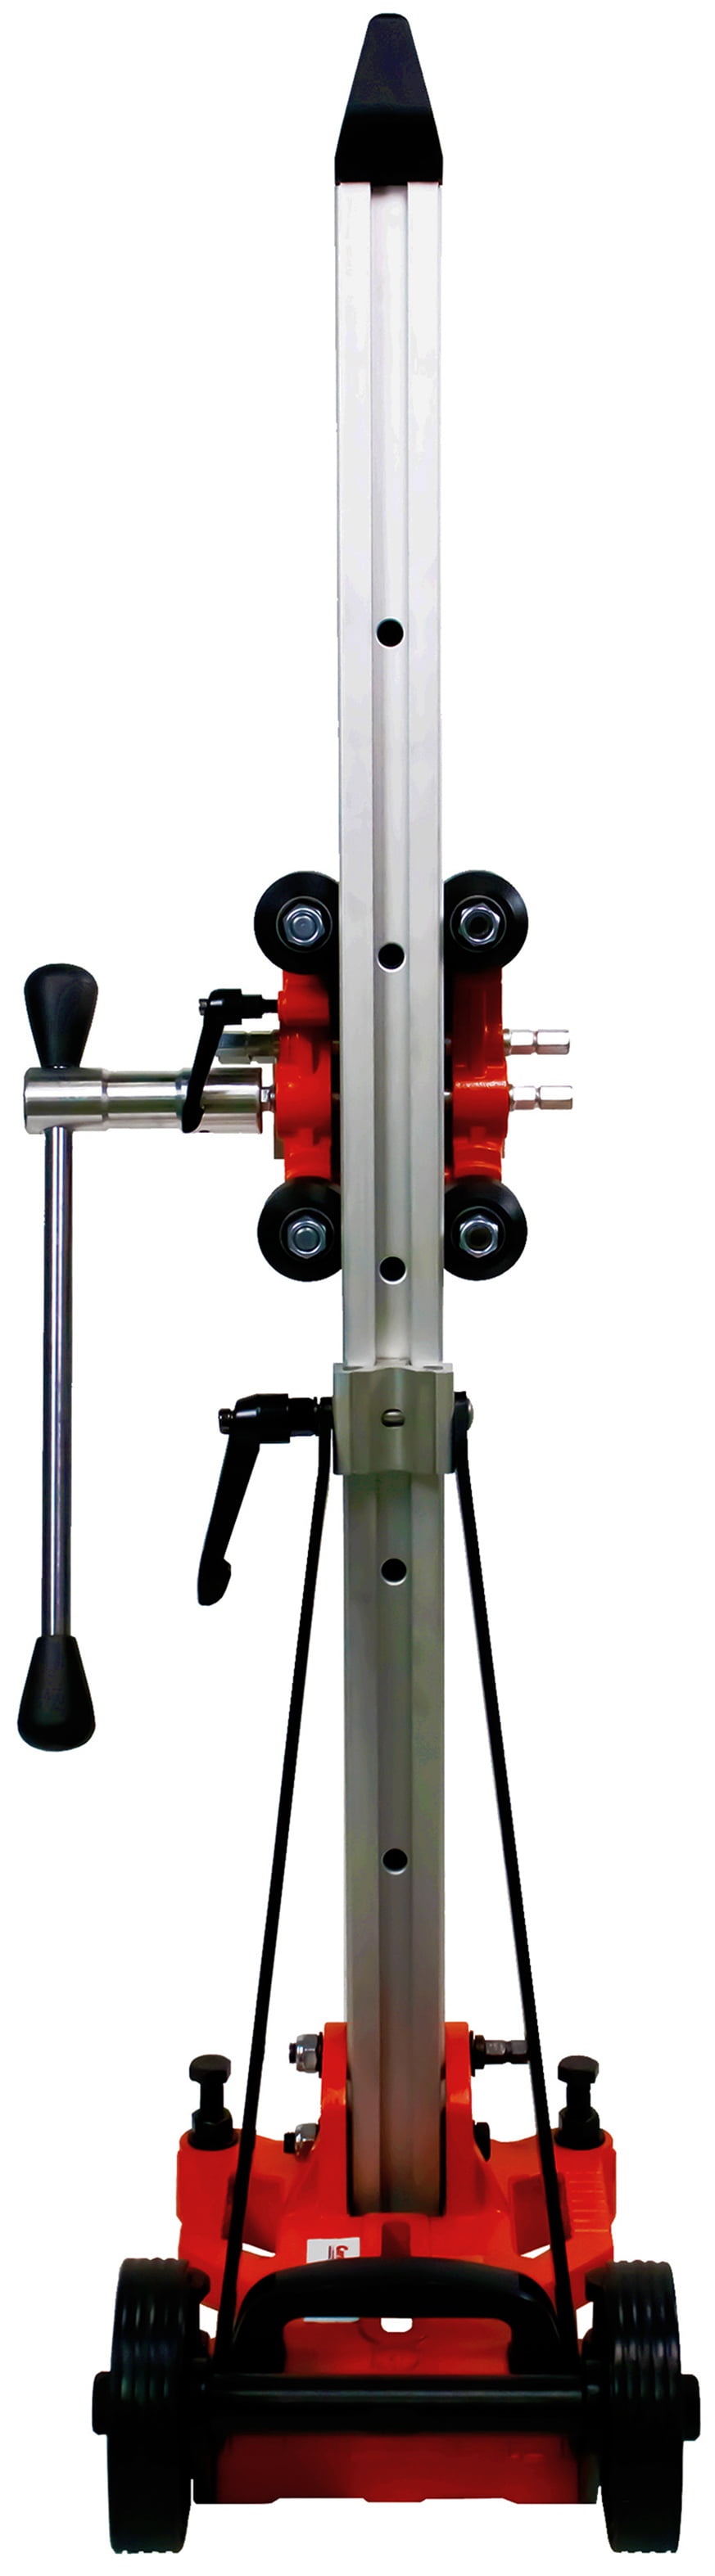 Cayken Aluminum Diamond Core Drill Rig Stand 4.5" Wheels for Easy Portability 